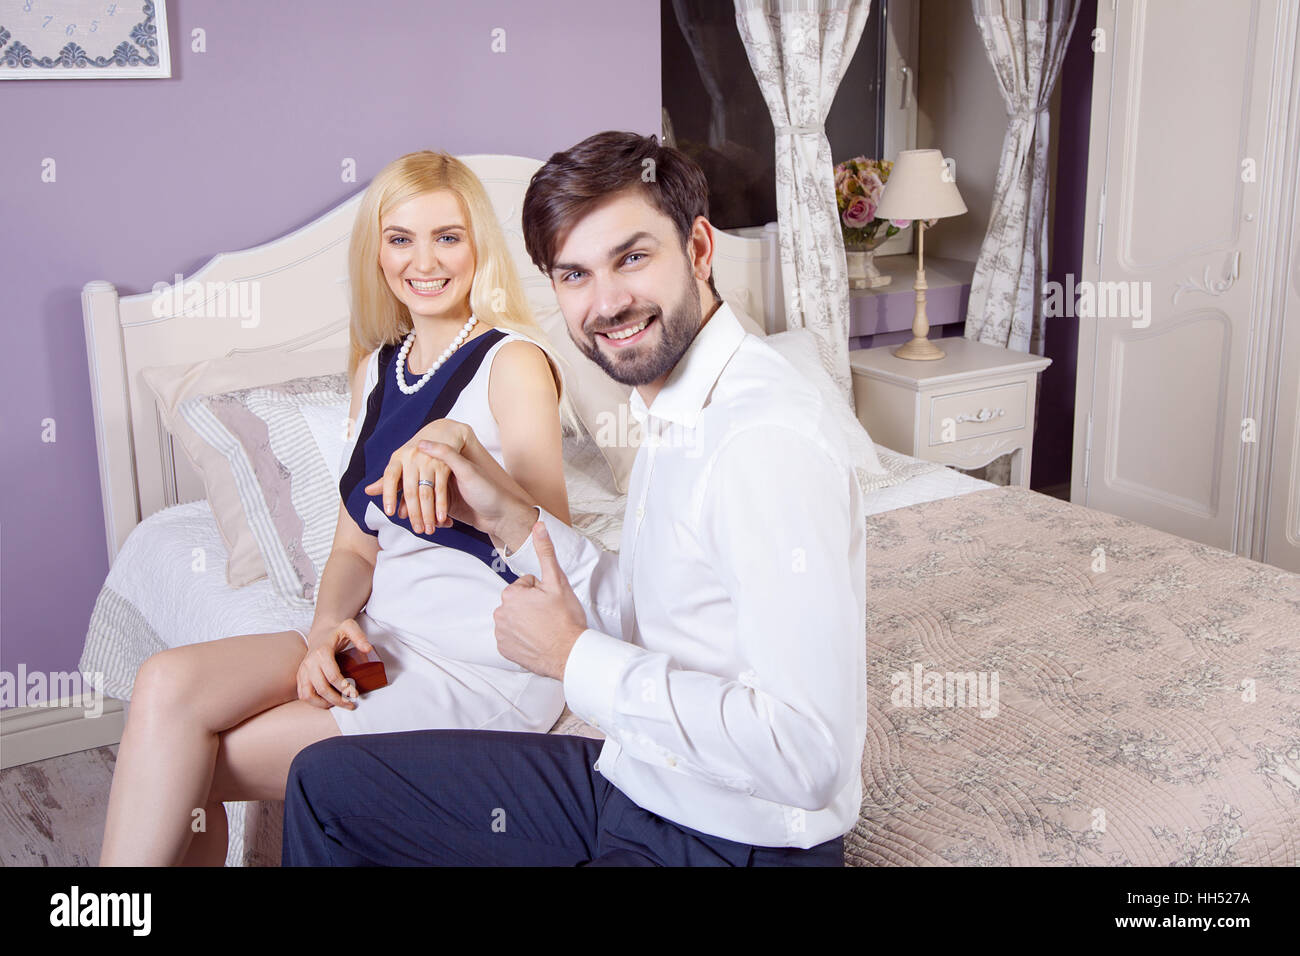 Handsome man doing a marriage proposal while offering his wife an engagement ring. Boyfriend make a marriage proposal. Stock Photo